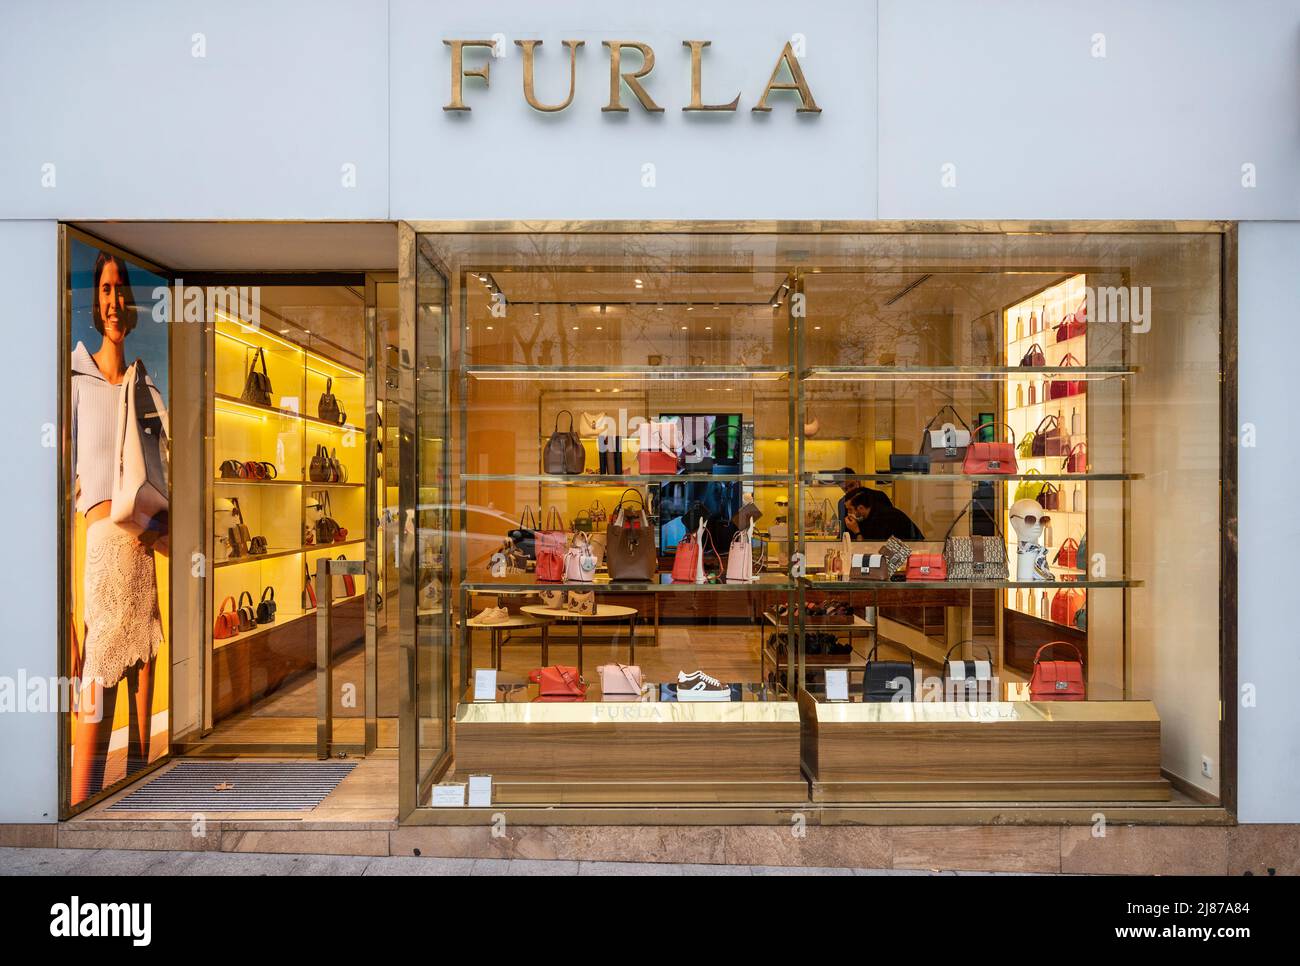 Furla Shop High Resolution Stock Photography and Images - Alamy